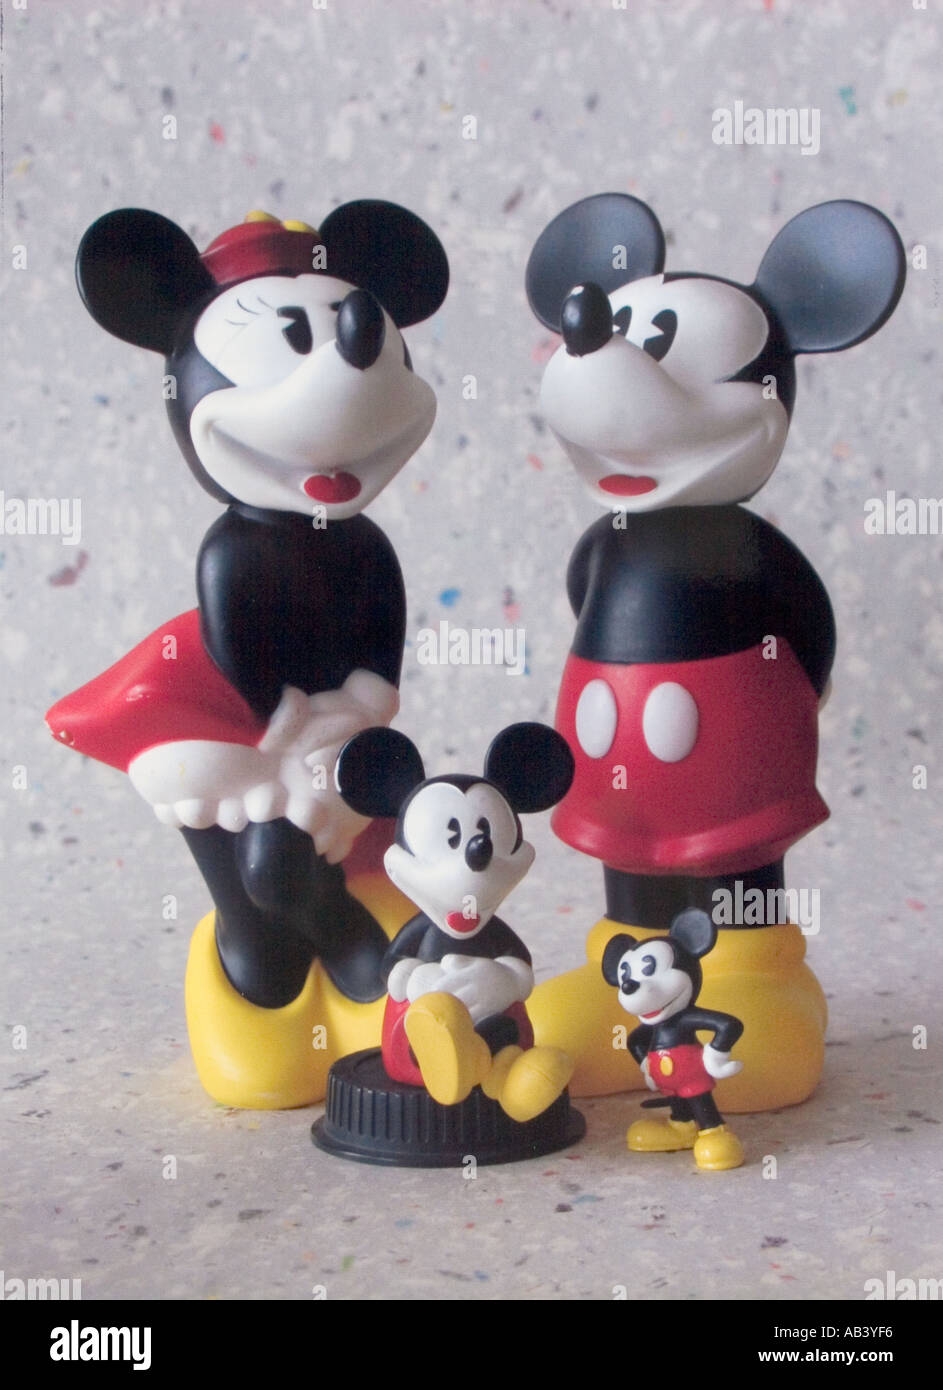 Mickey and Minnie Mouse Shampoo containers Stock Photo